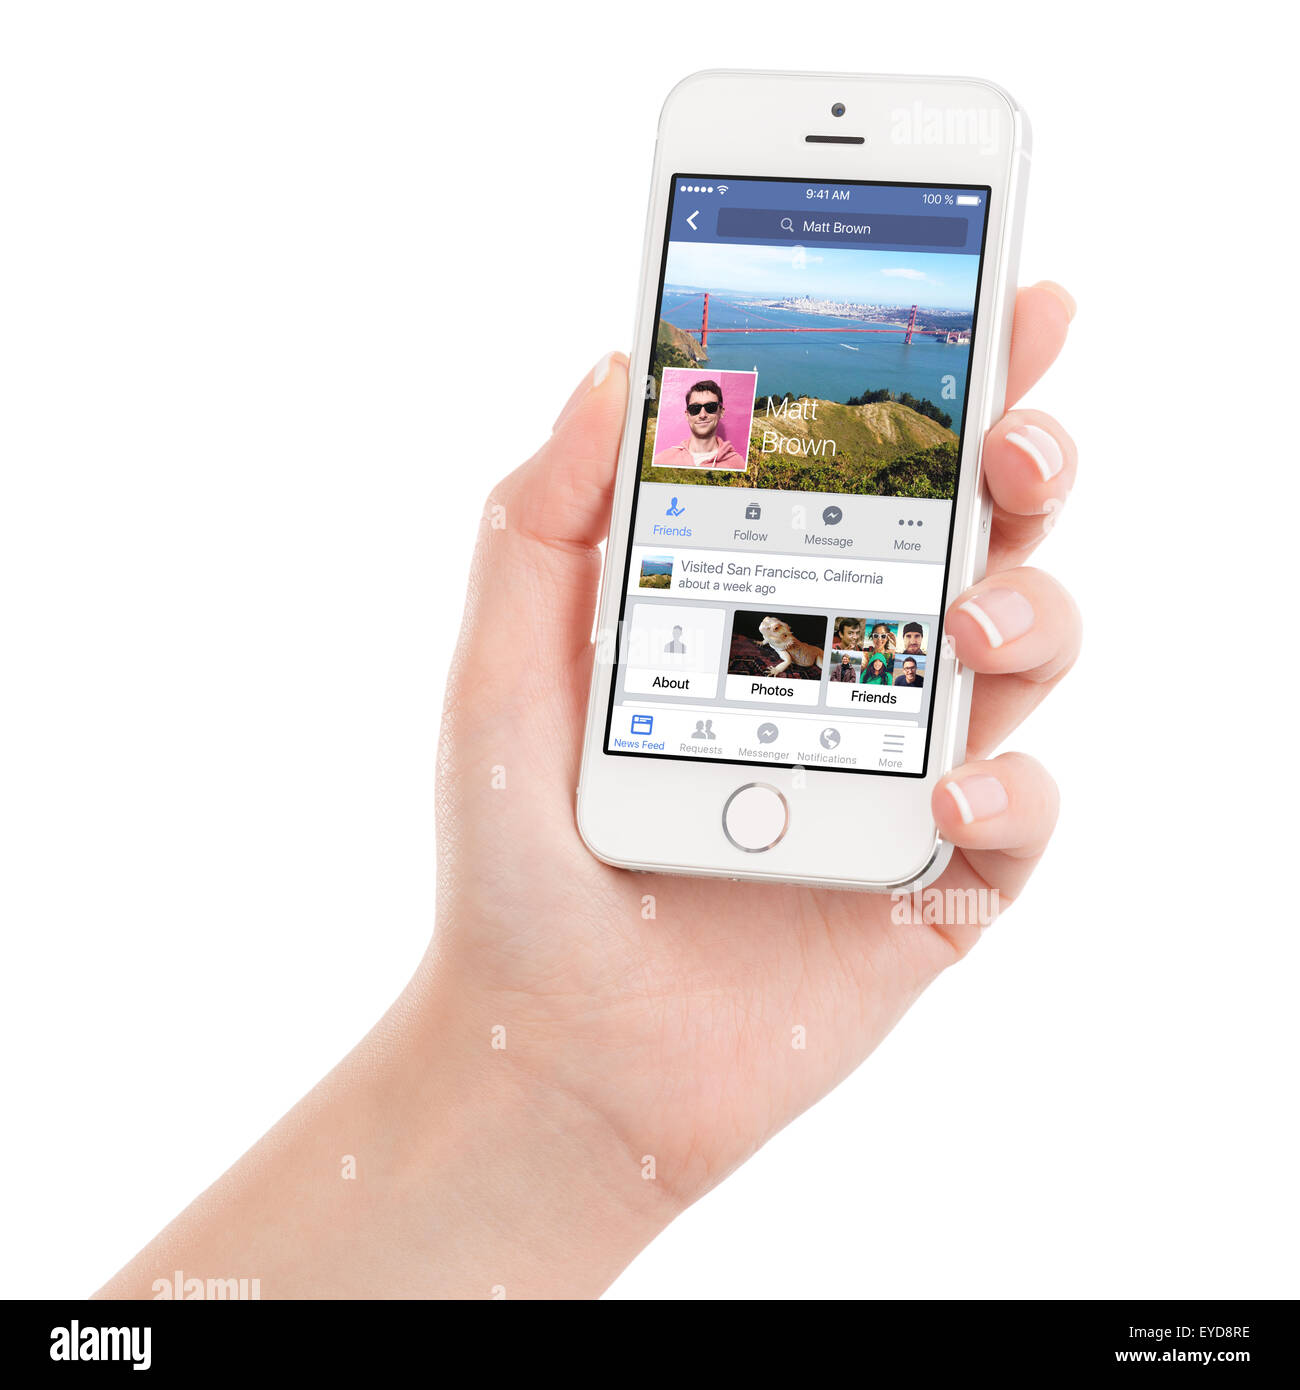 Varna, Bulgaria - February 02, 2015: Female hand holding Apple Silver iPhone 5S with Facebook application on the screen. Stock Photo